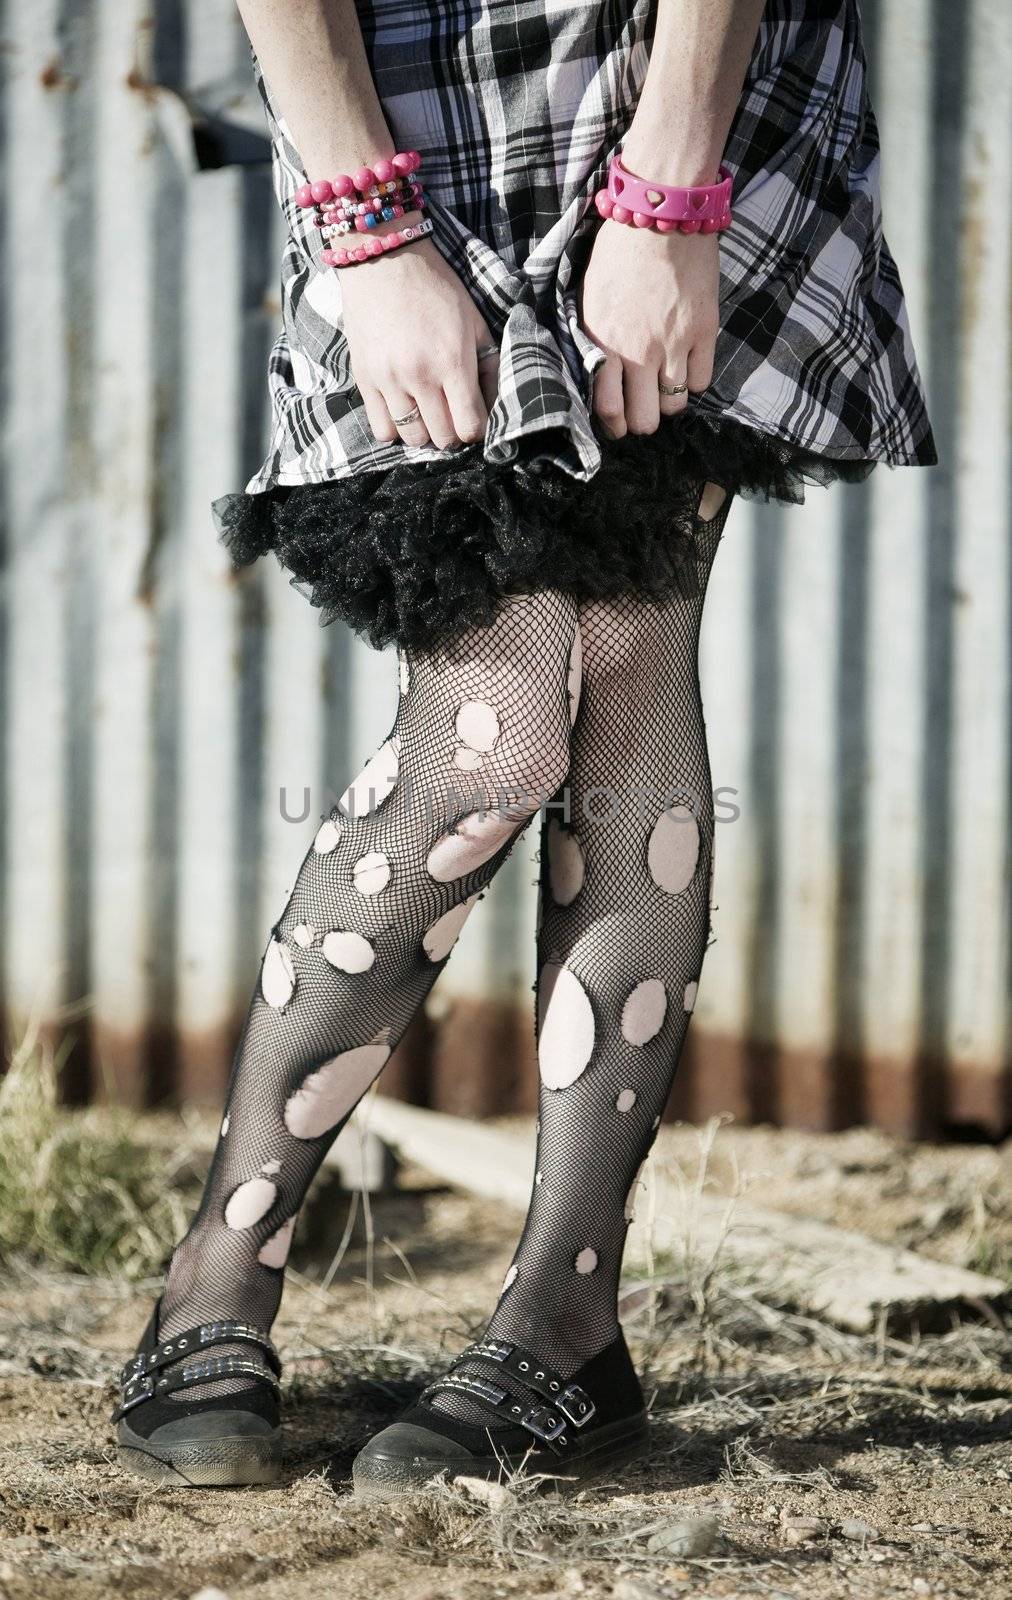 Hem of a dress and woman's legs with ripped stockings